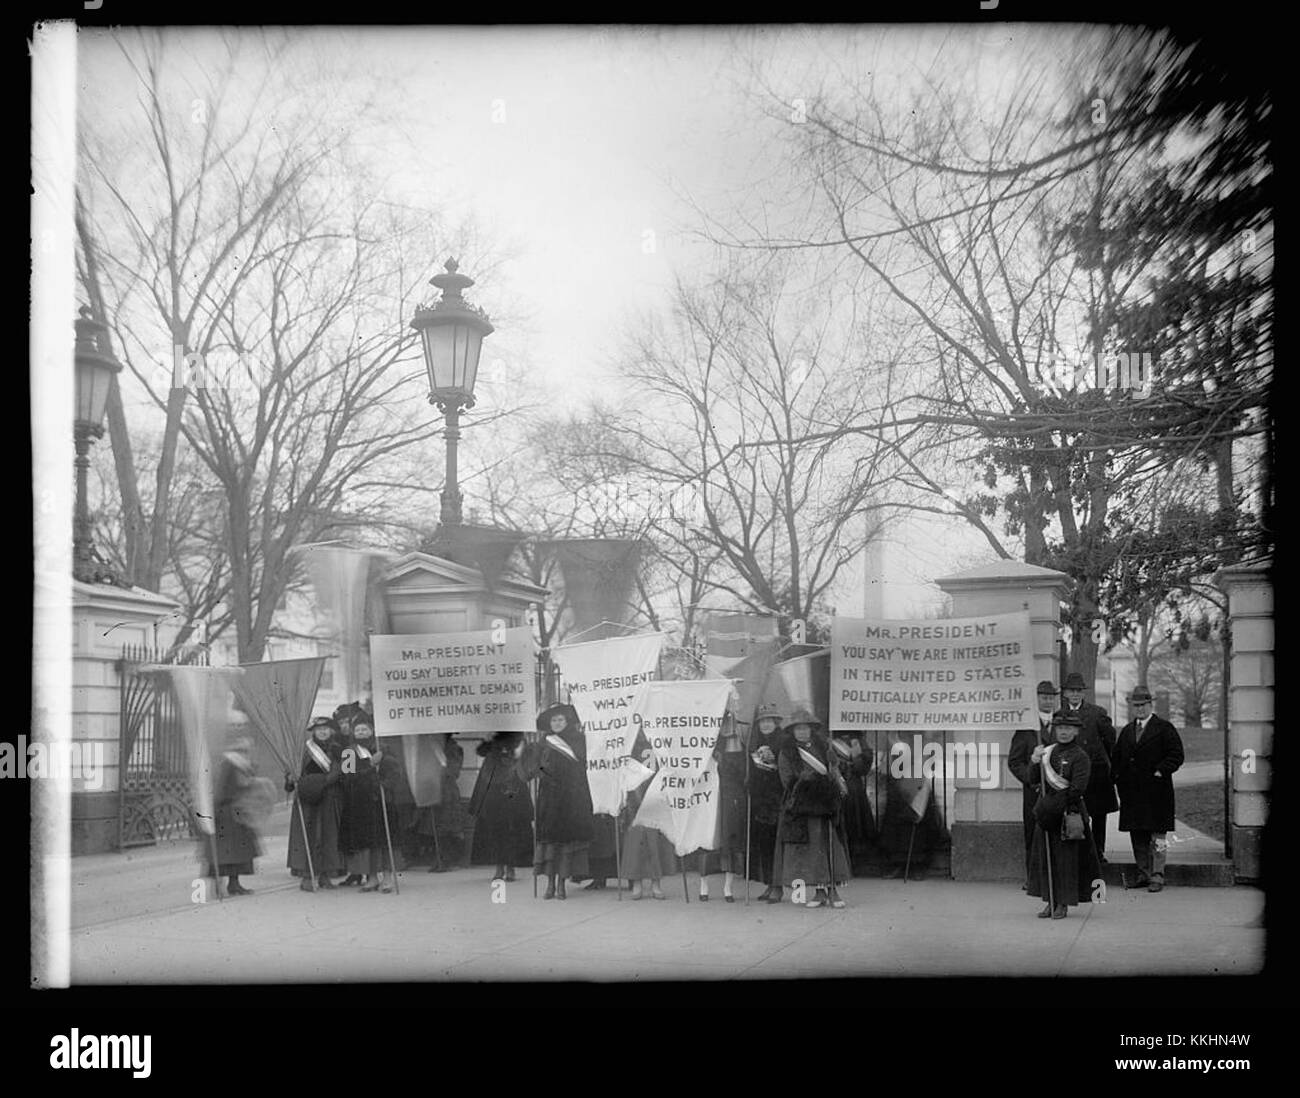 Suffragette pickets at White House32664v Stock Photo